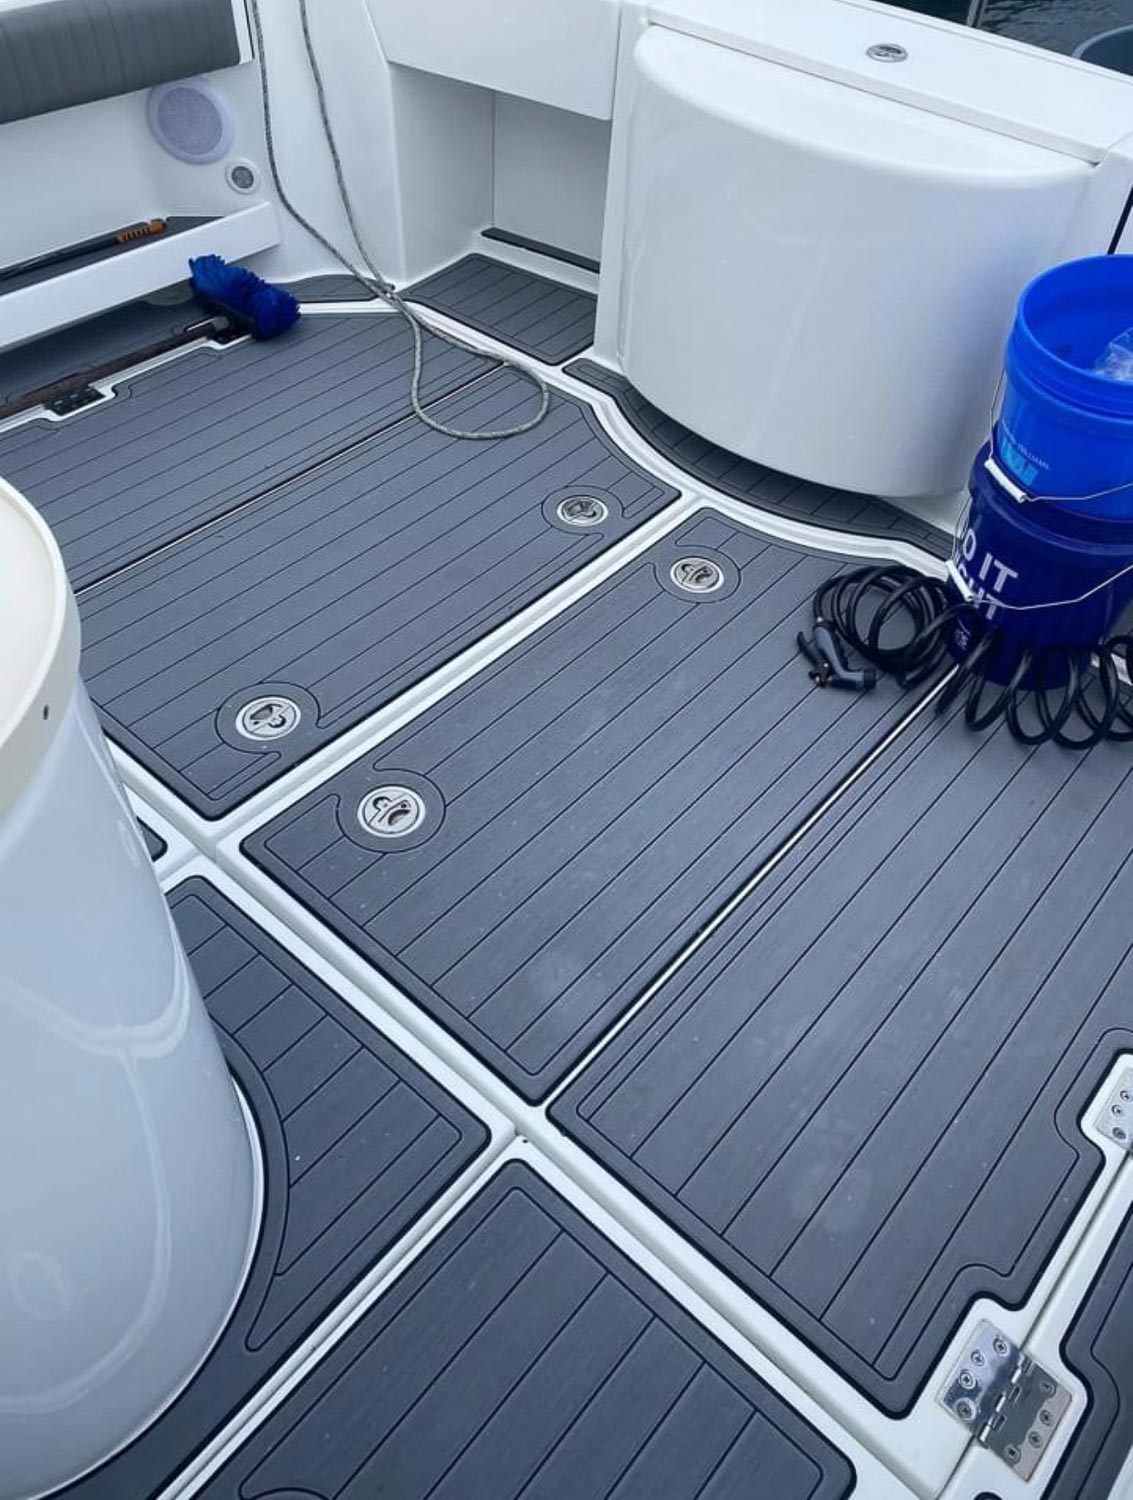 Fishing is better with Seadek installed. Easy to clean & maintain.